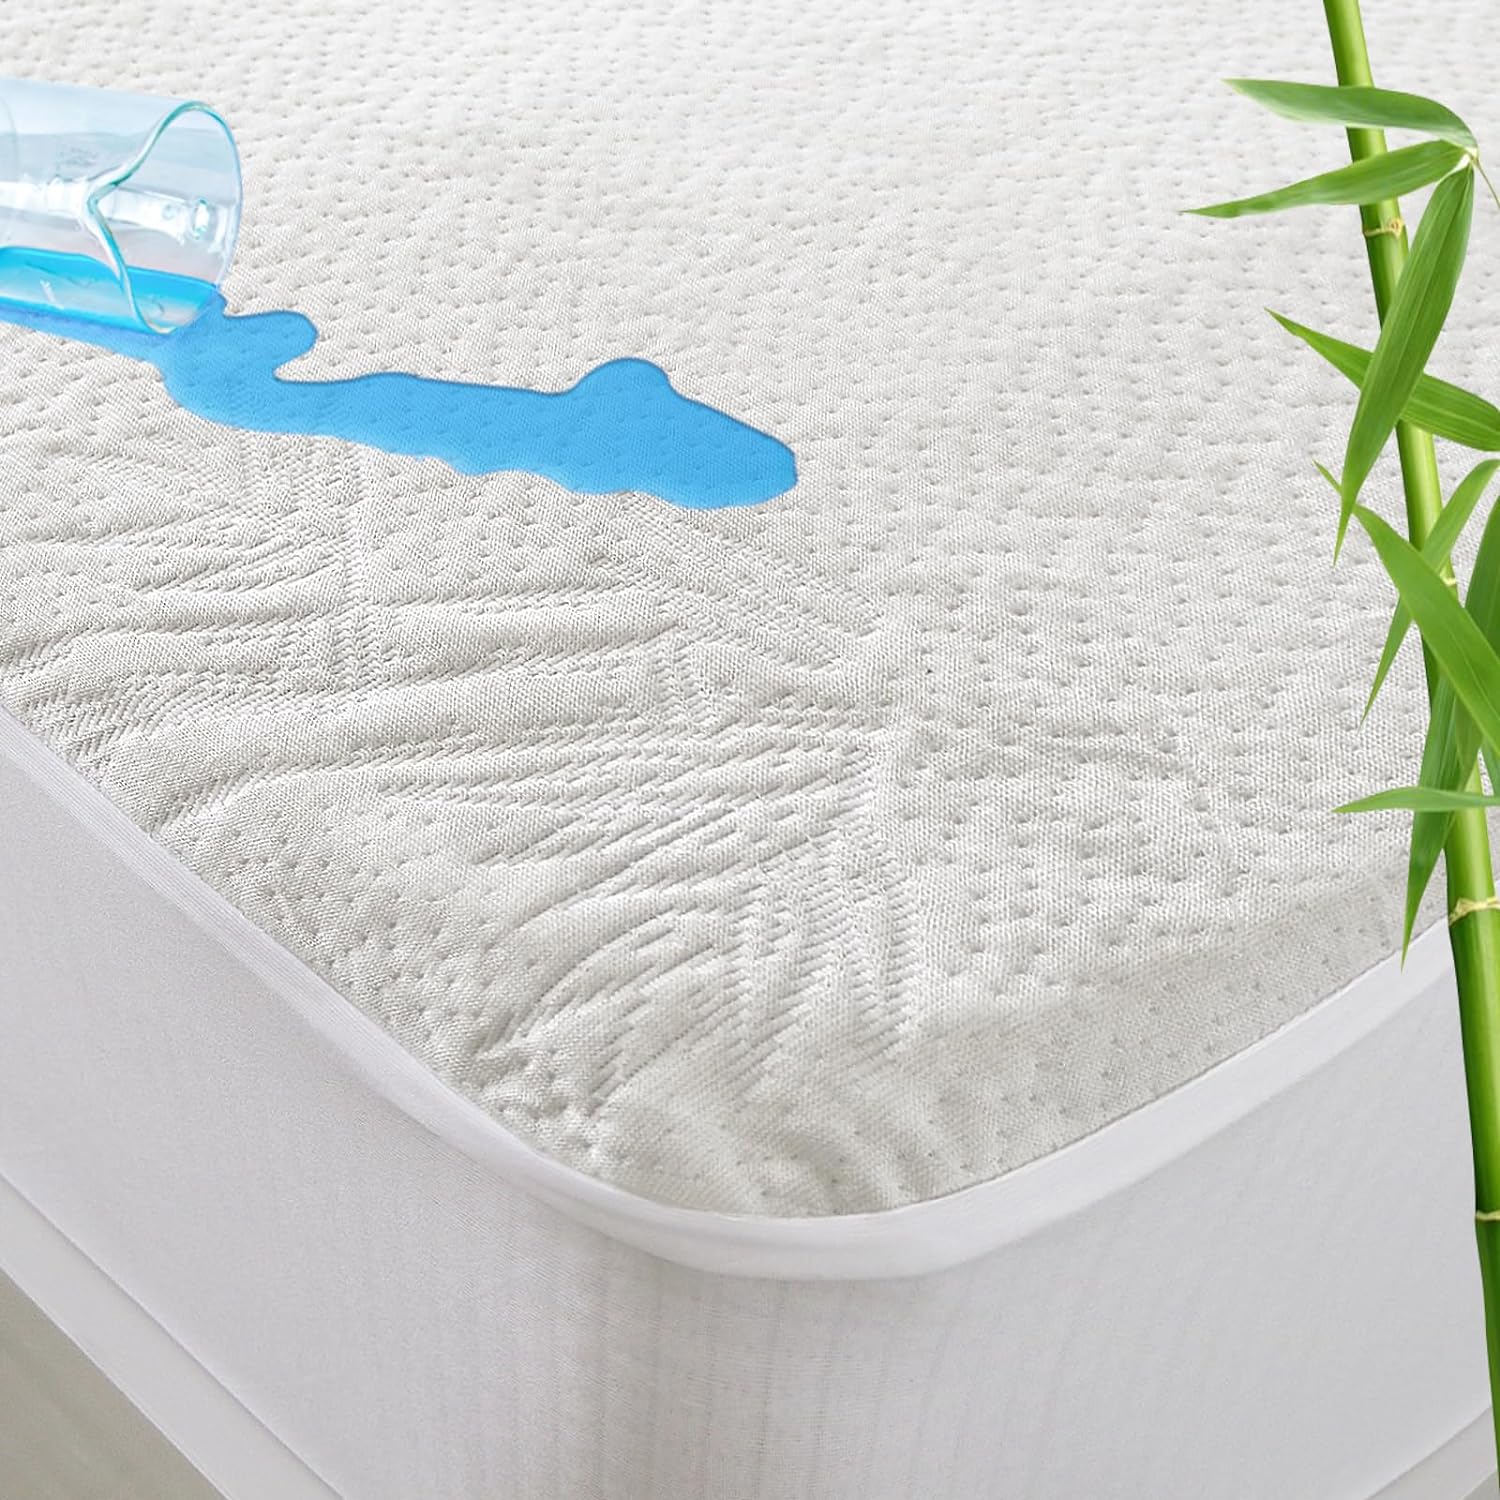 Waterproof Bamboo Mattress Protector Full Size, Cooling 3D Air Fabric, Noiseless & Breathable Mattress Pad Cover Fitted Up to 14" Depth - Biloban Online Store